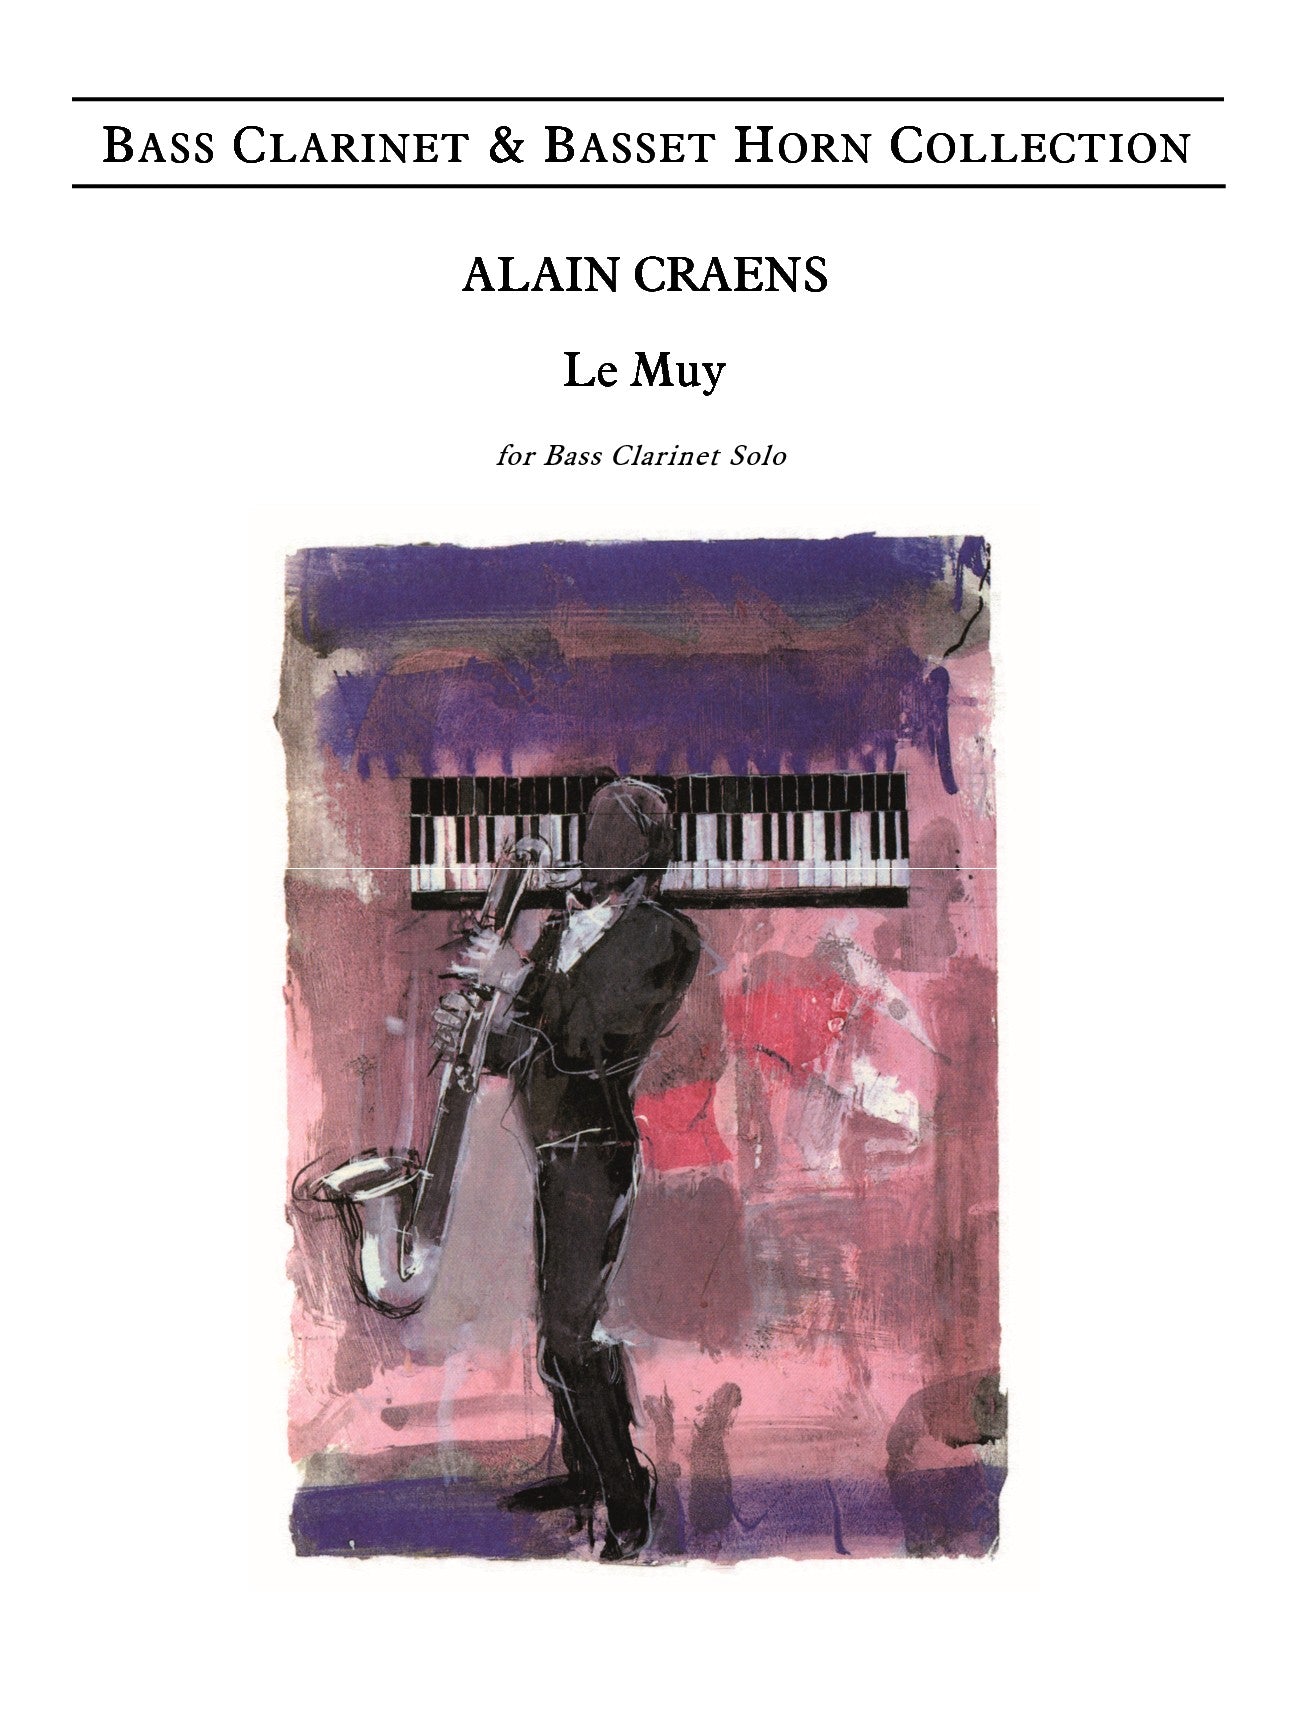 Craens - Le Muy for Solo Bass Clarinet